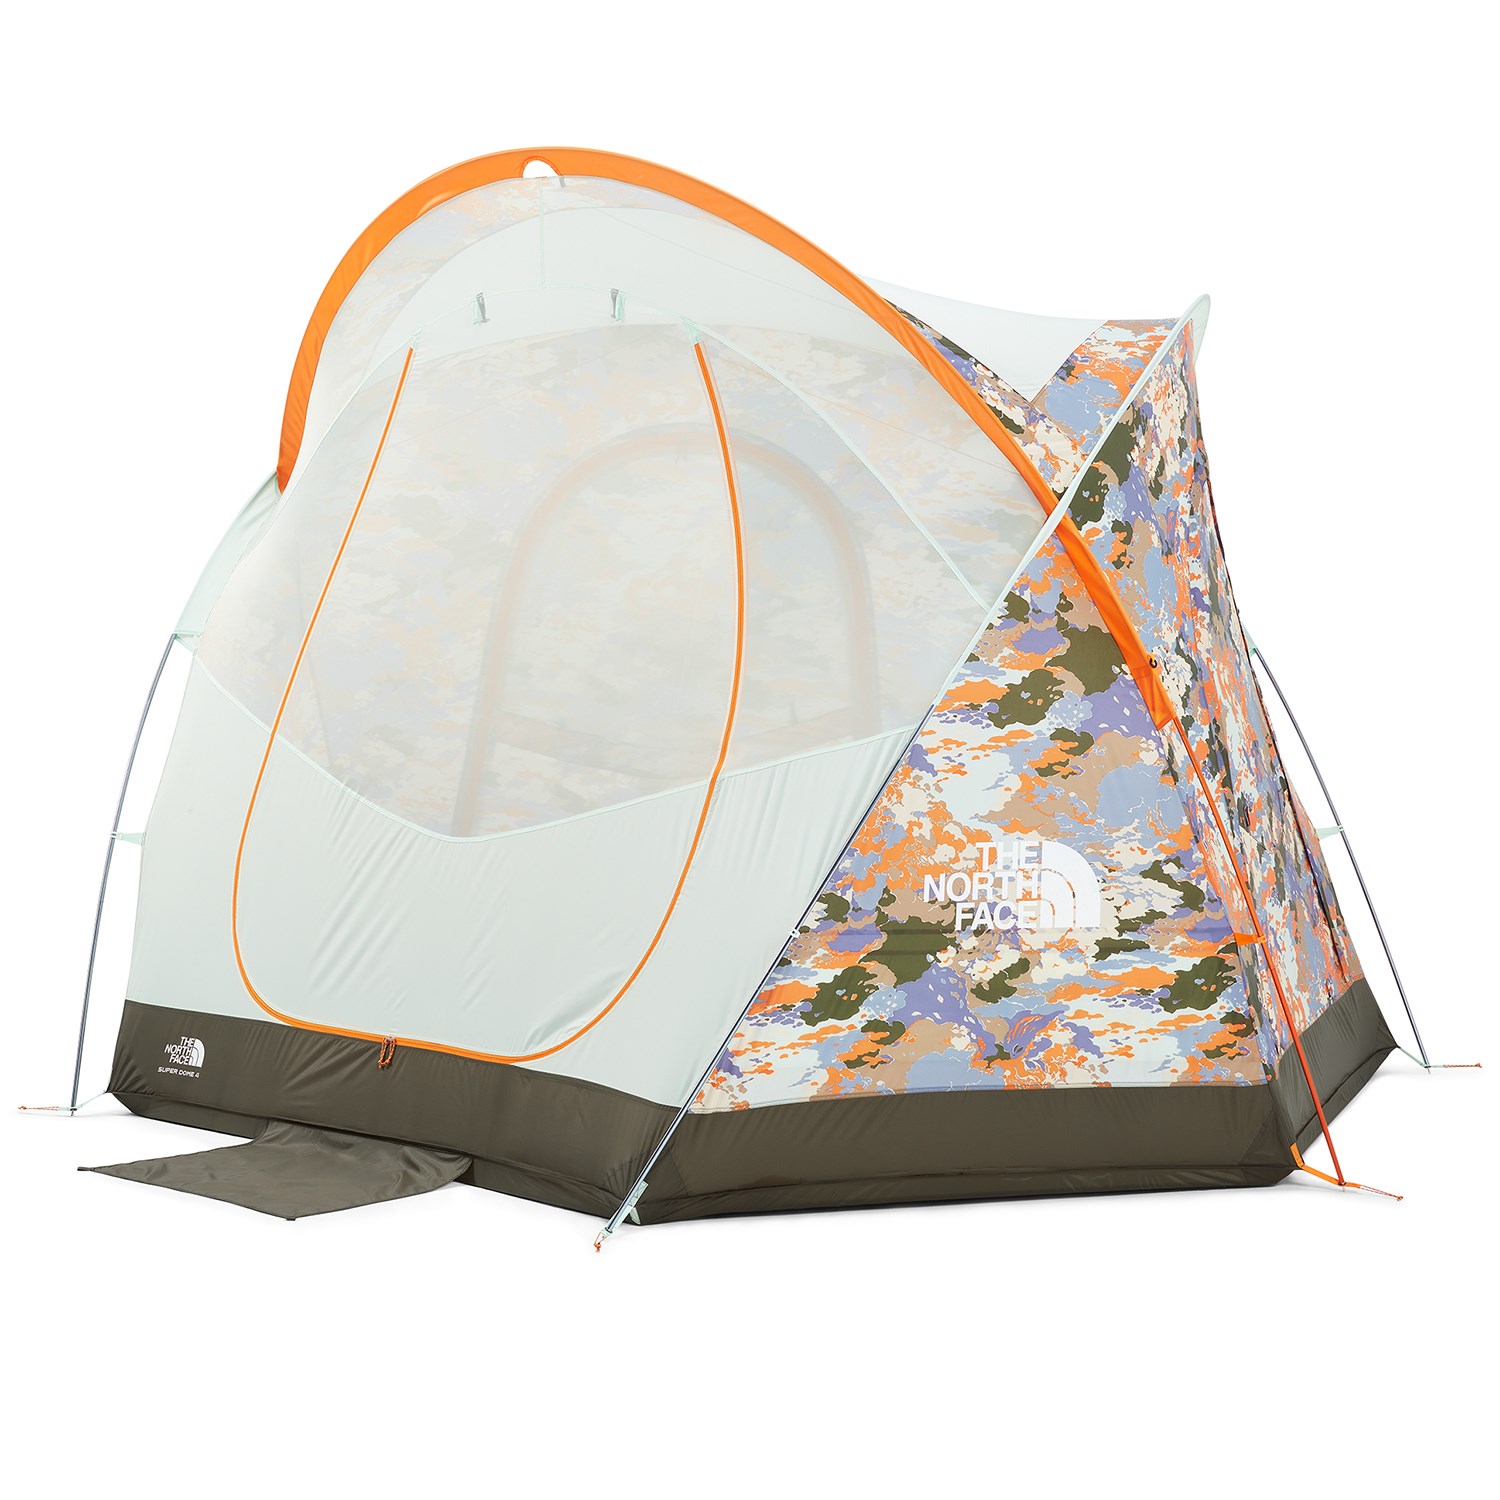 north face golden gate 4 tent